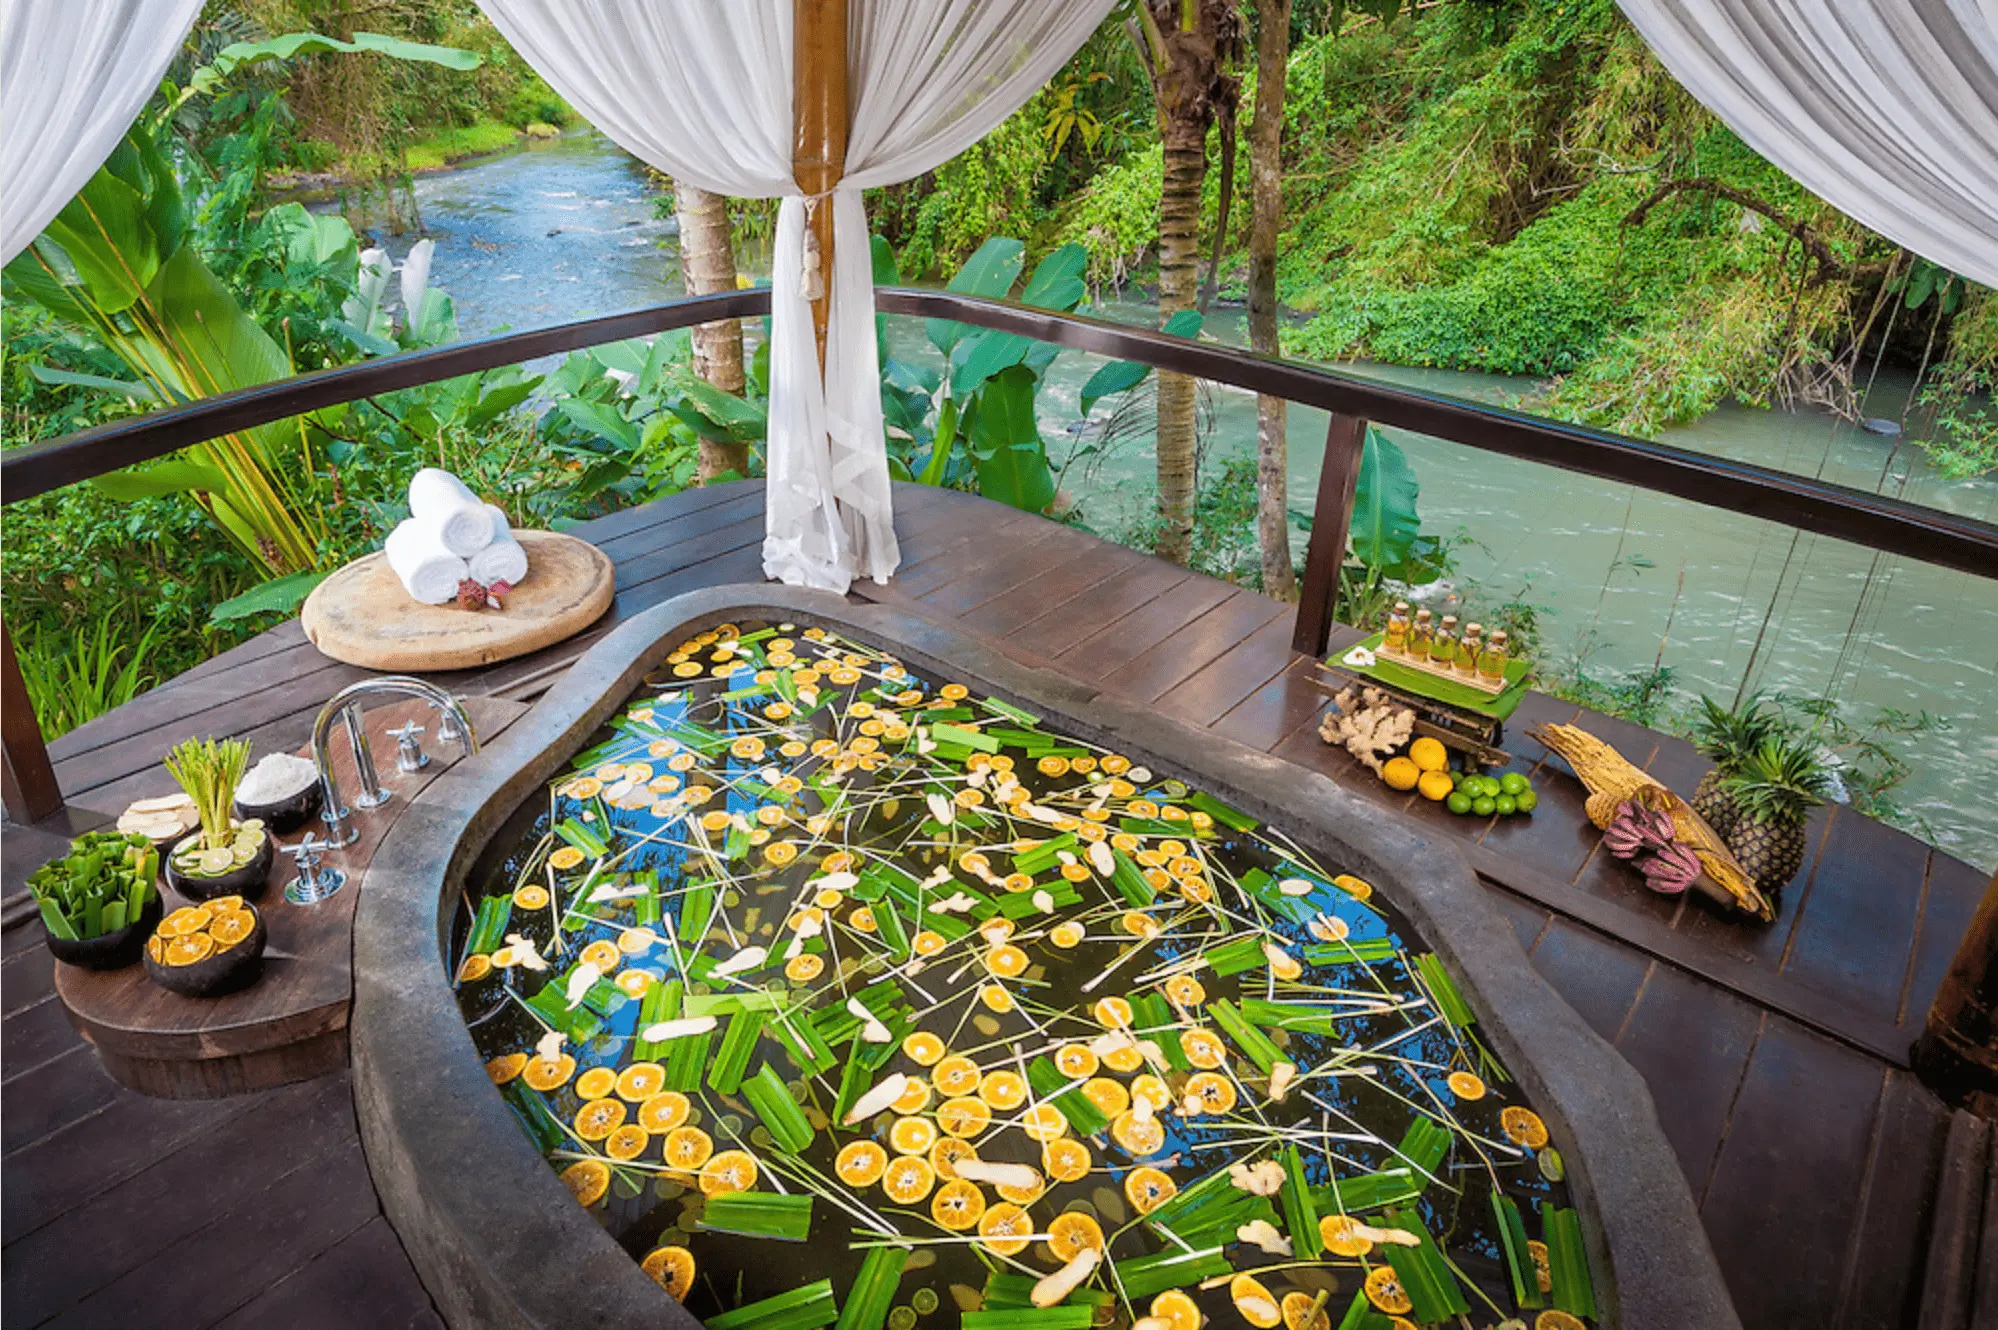 A detox spa bath at Fivelements Bali, filled with flowers and lemons floating on water, set on a wooden deck overlooking a lush river. 